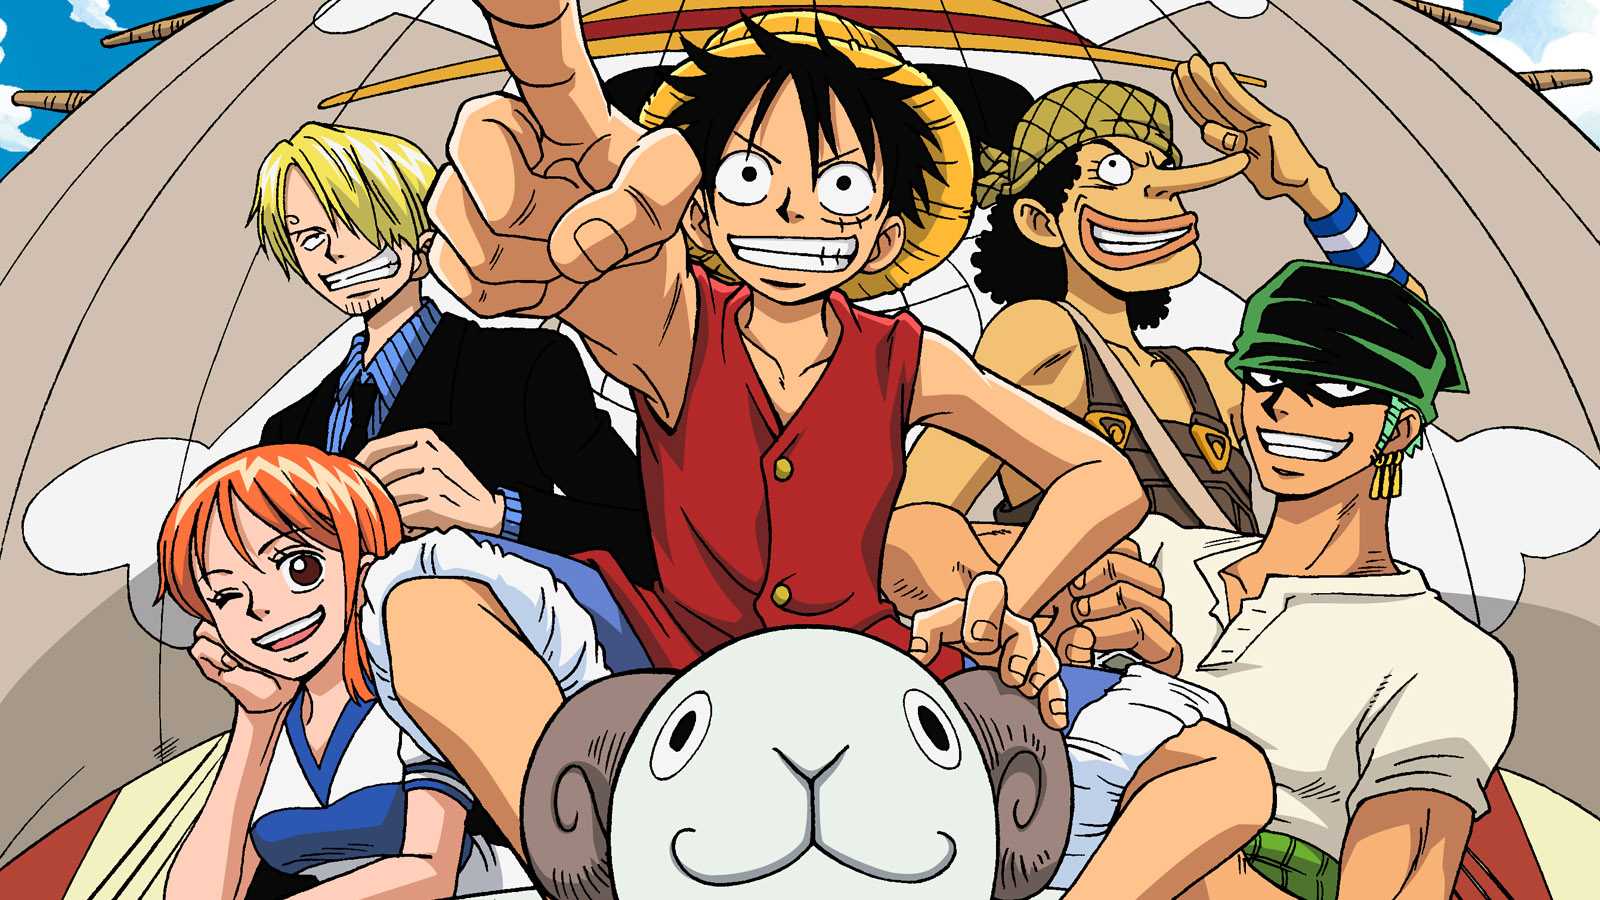 Anime, One Piece, Monkey D. Luffy, real people, lifestyles HD wallpaper